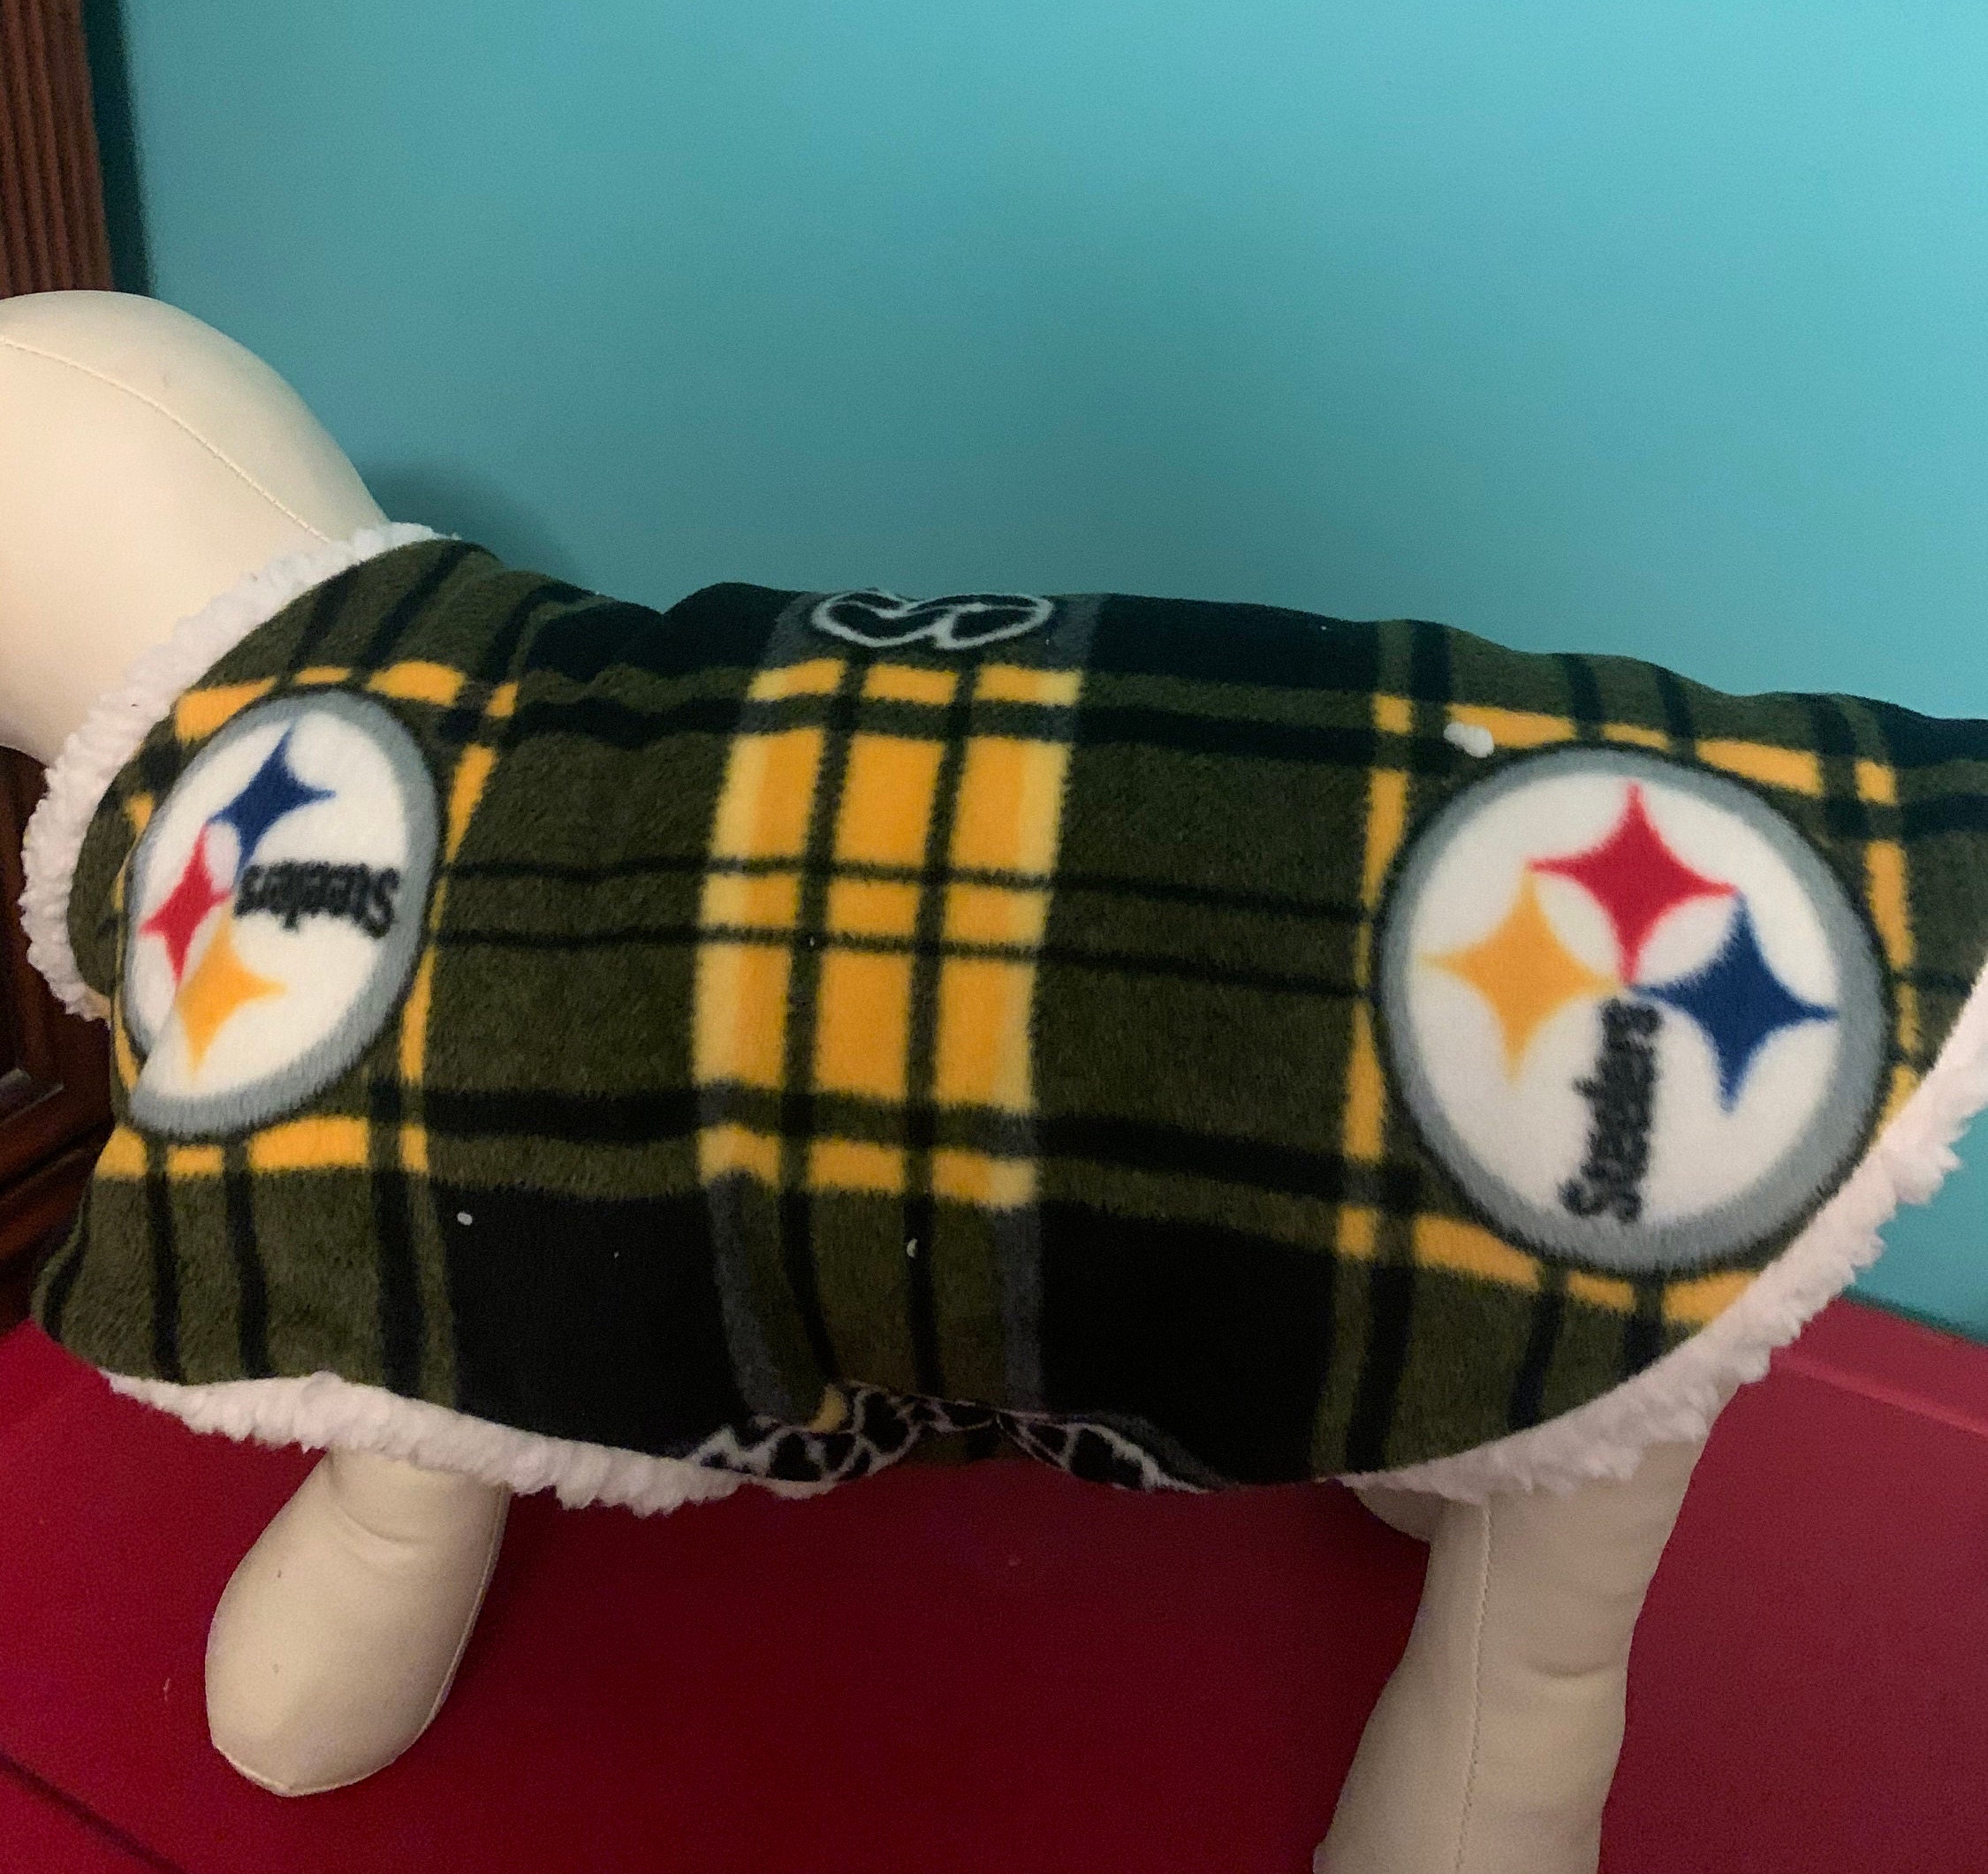 steelers dog outfit